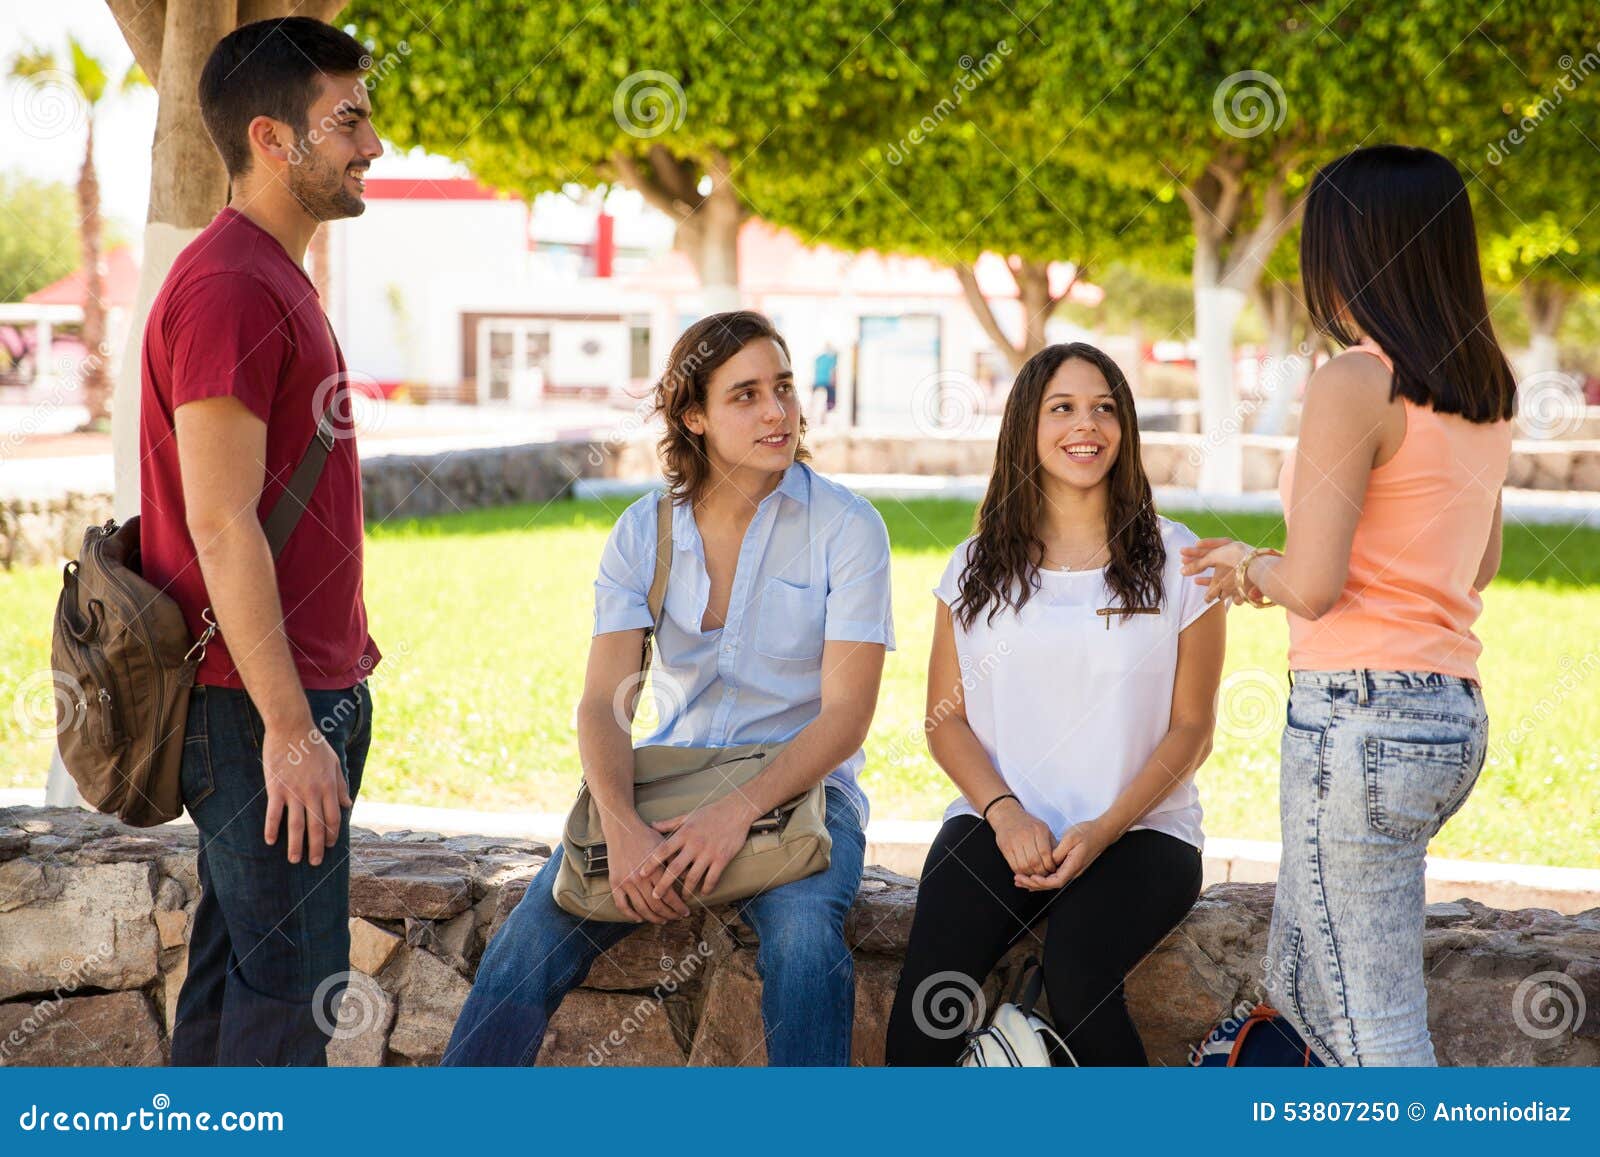 college students hanging out group hispanic friends school outdoors 53807250